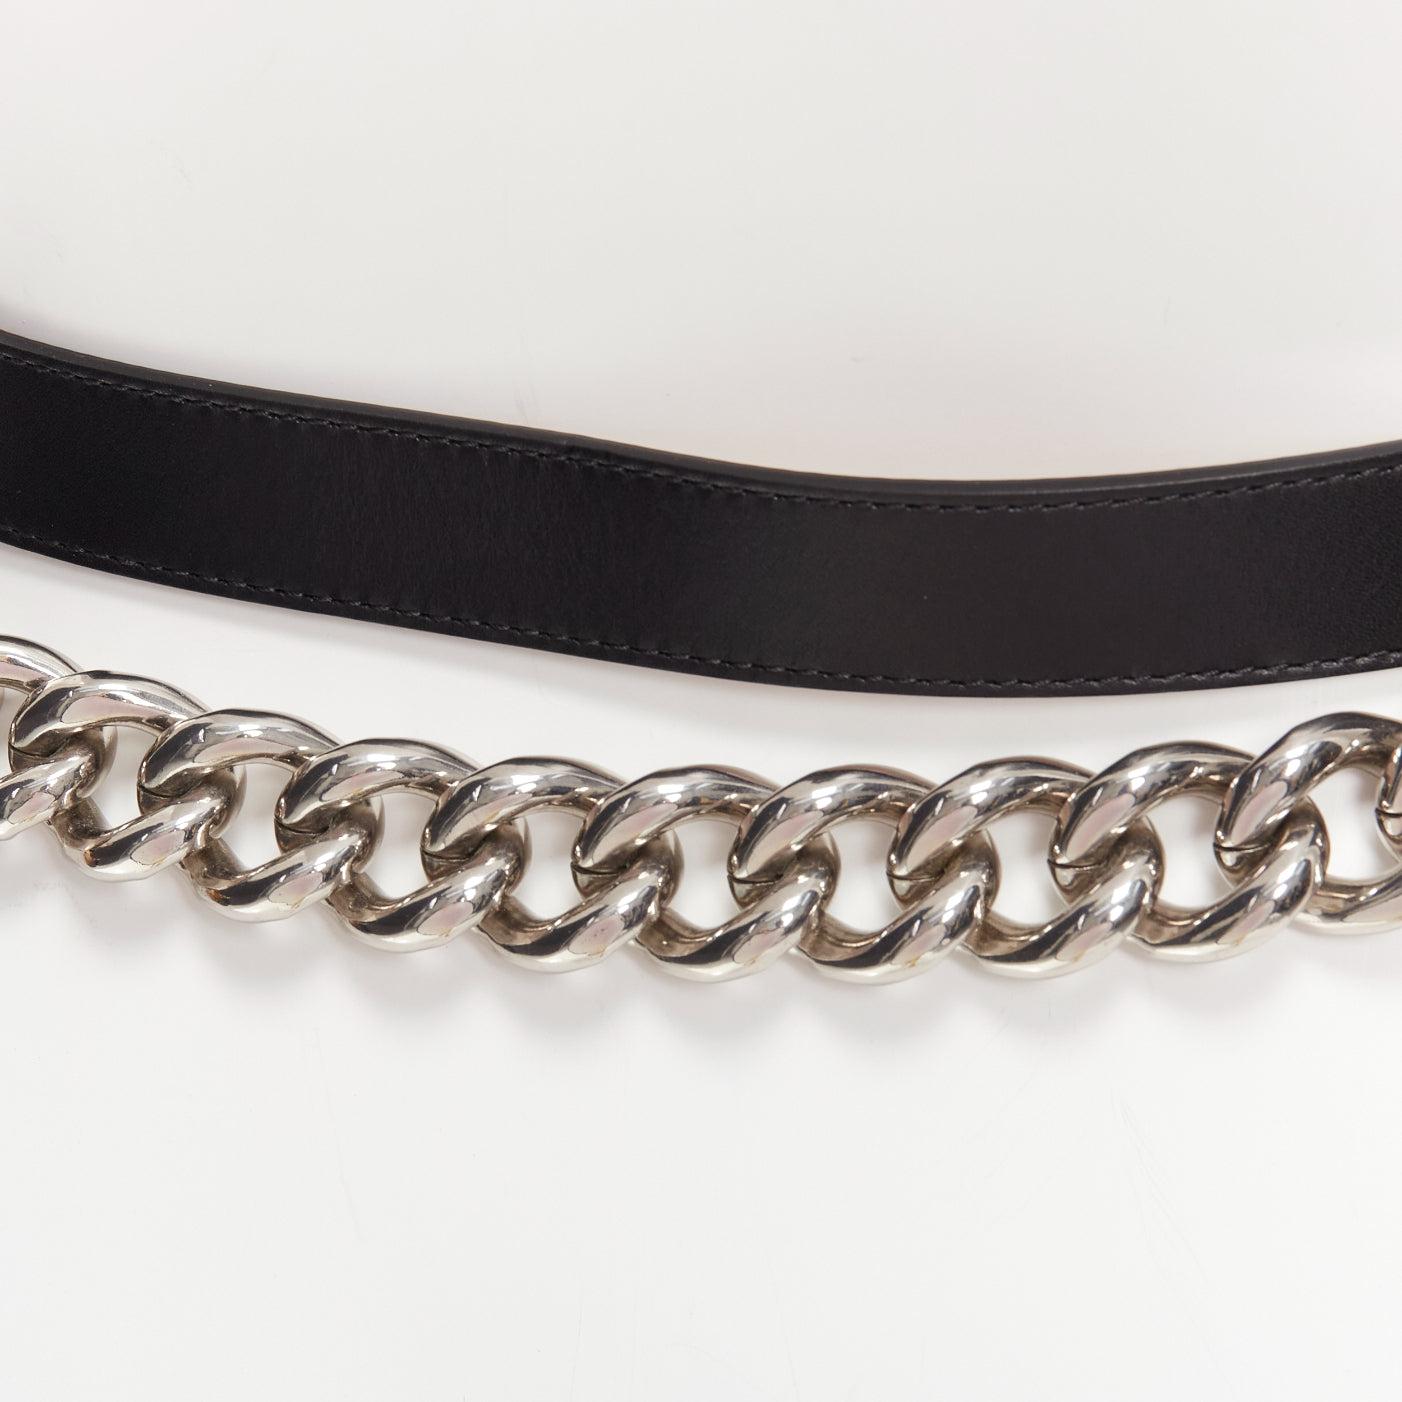 ALEXANDER MCQUEEN black leather silver chunky metal chain wrap belt 70cm For Sale 3